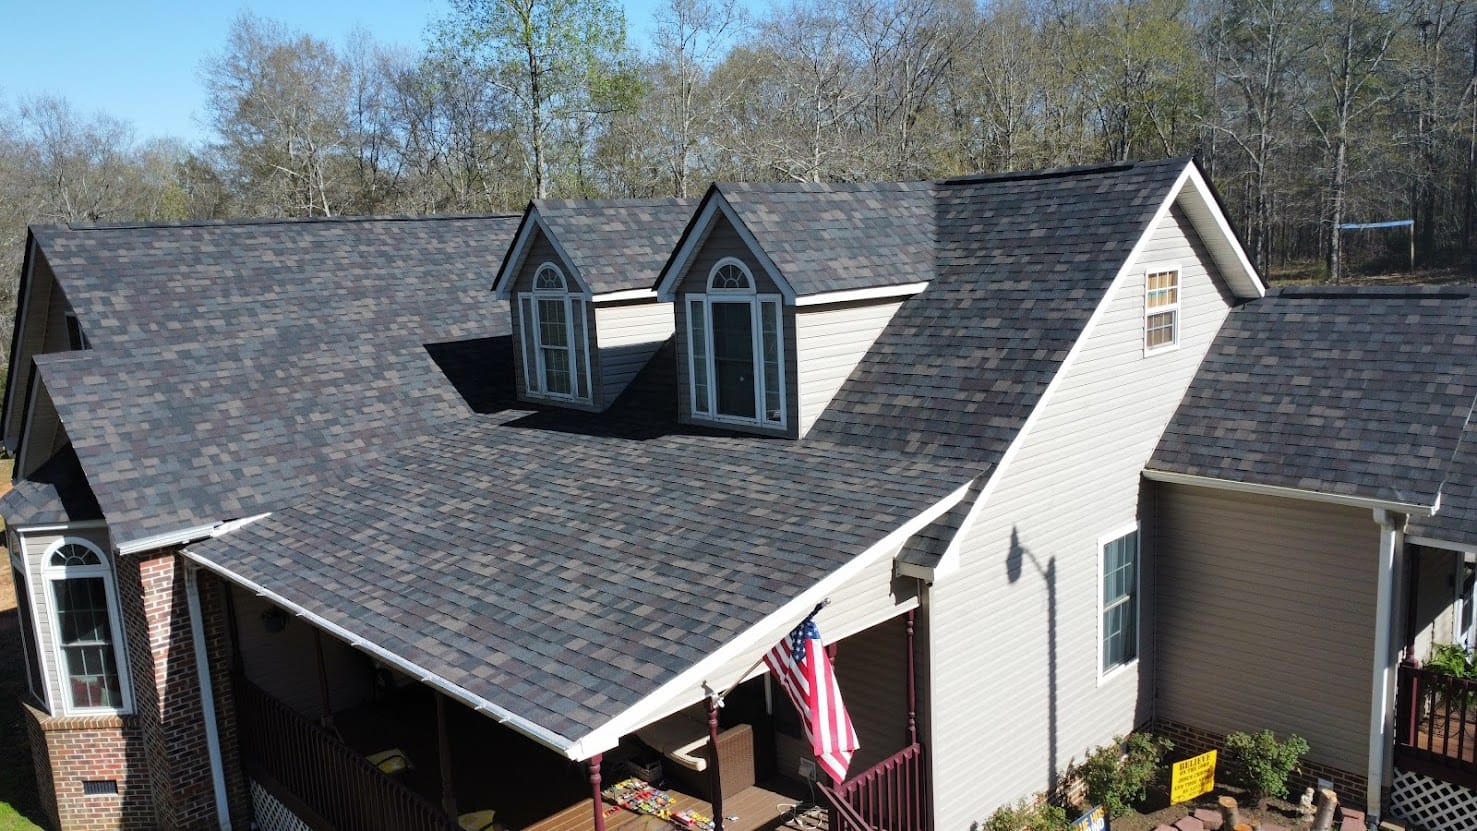 About Us - Benson Contracting Roofing